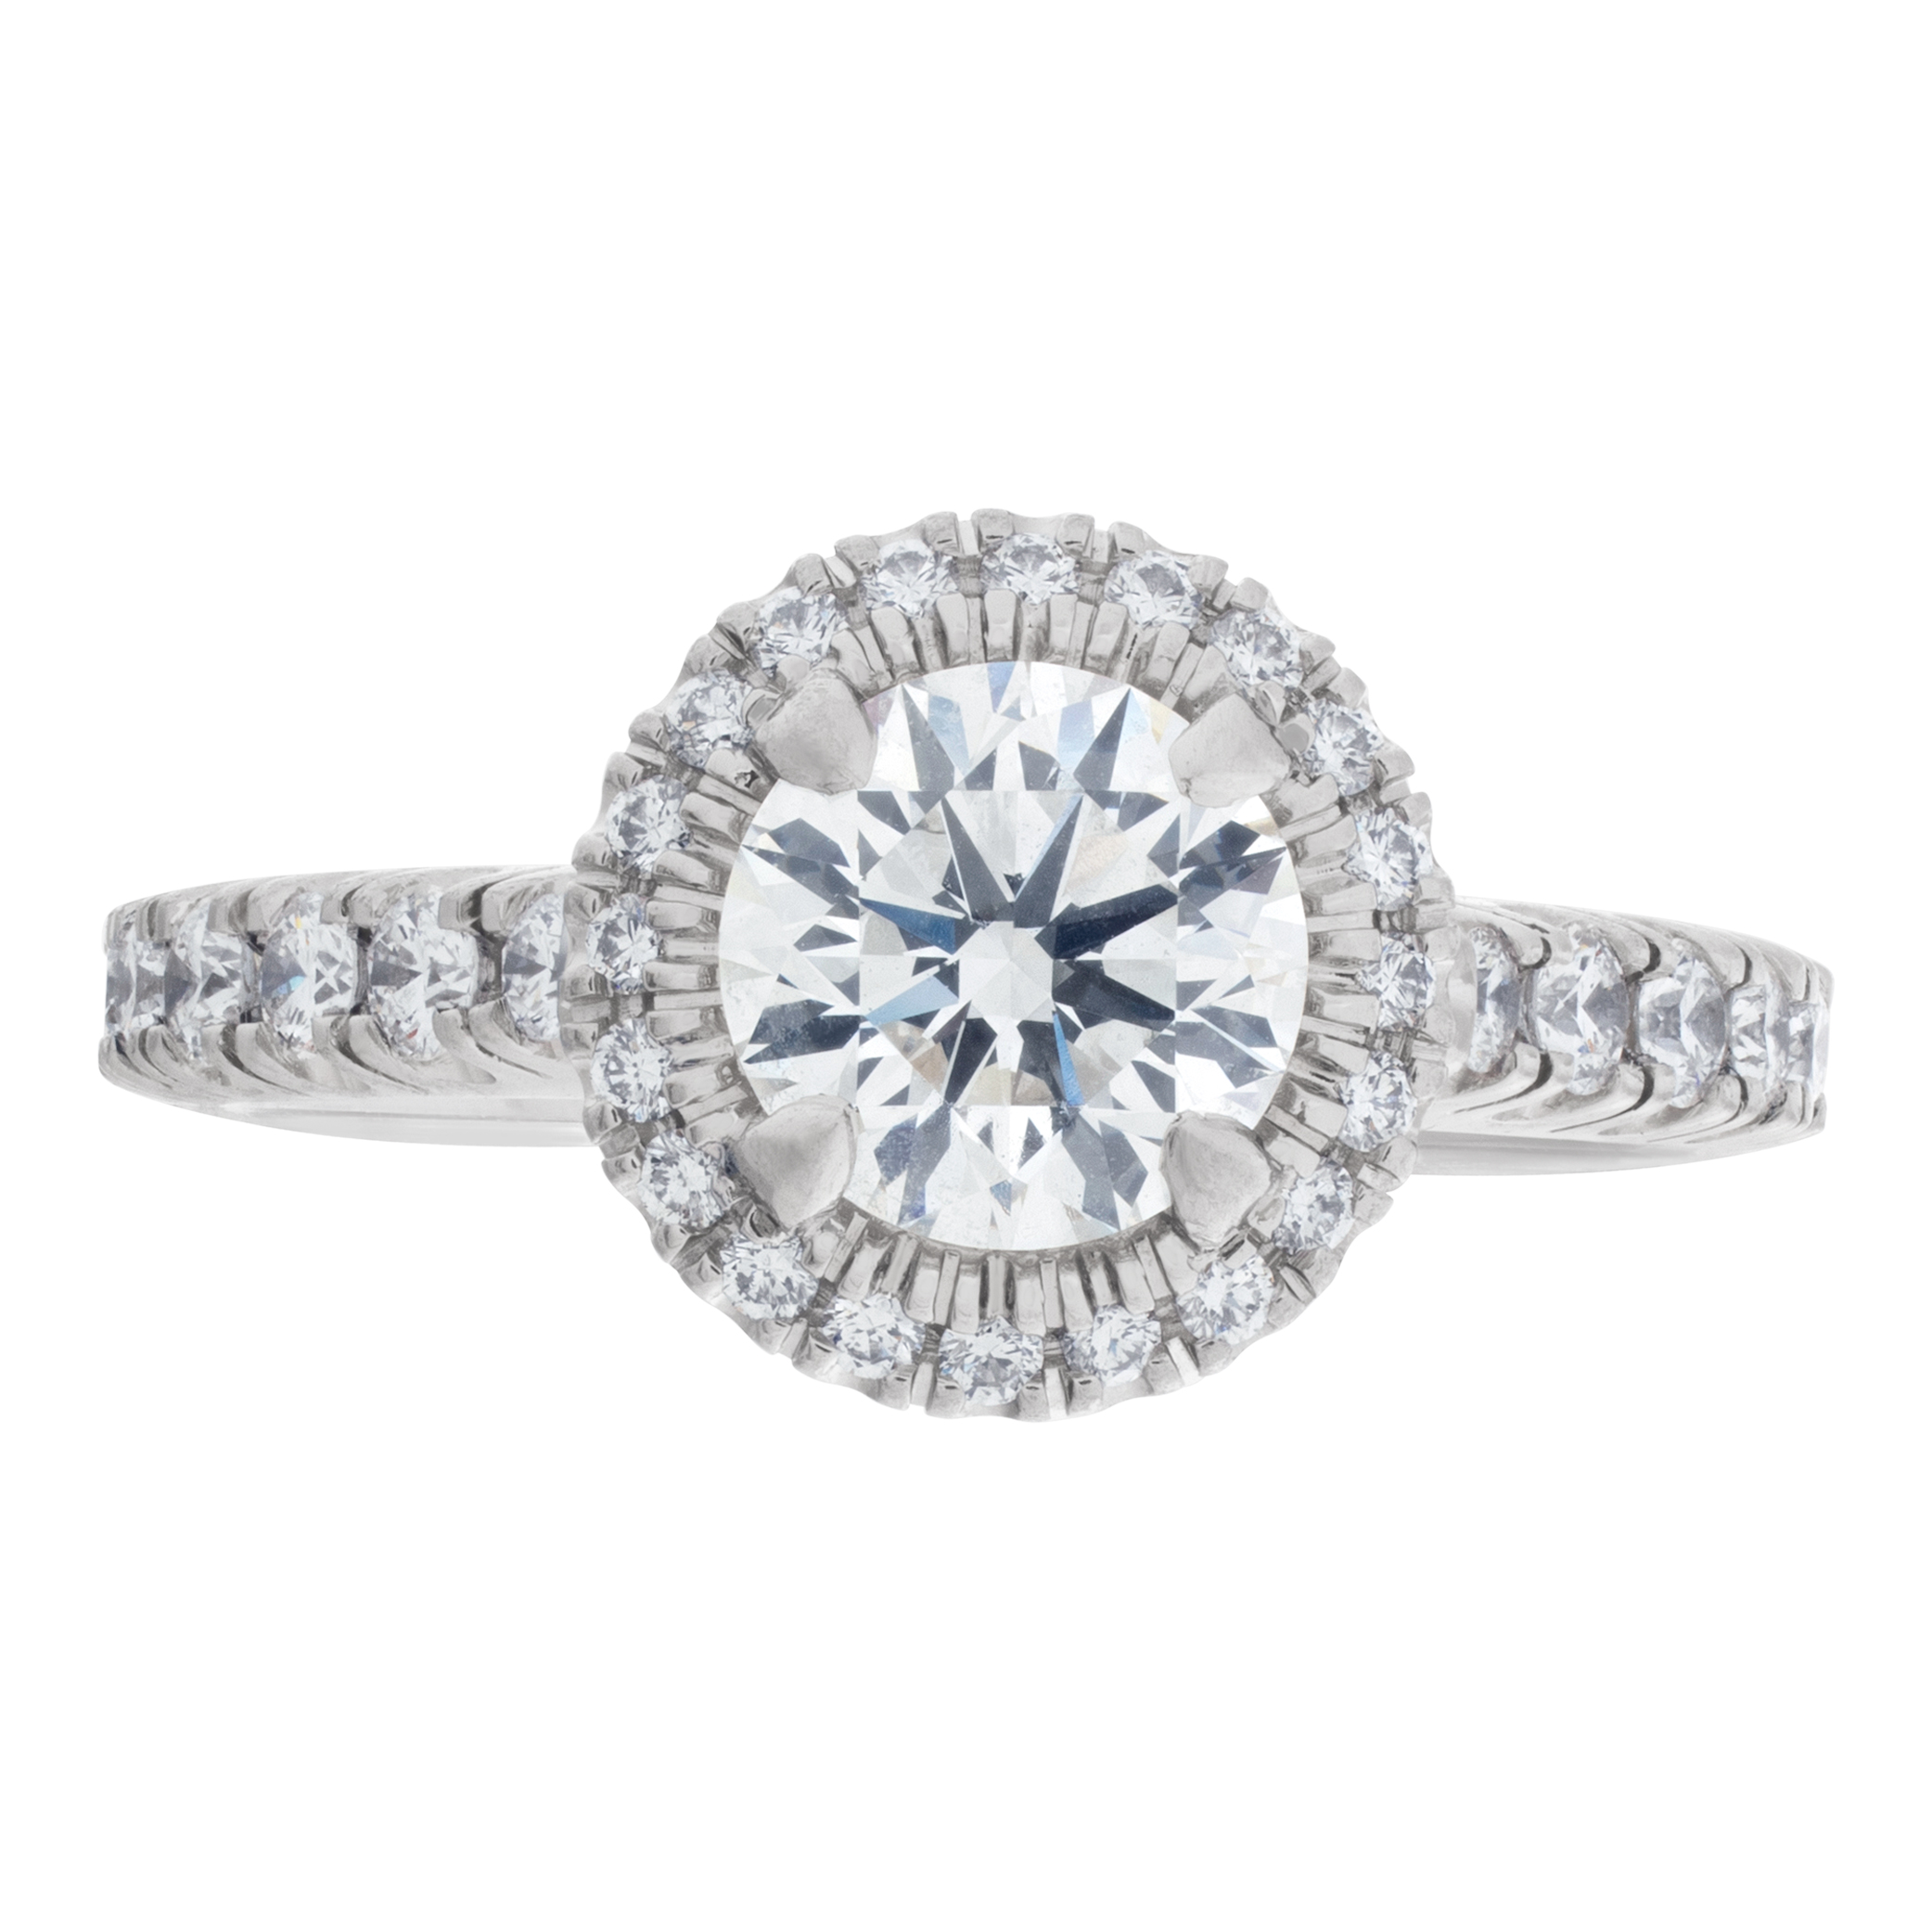 Cartier "Destinee" collection, GIA certified 0.73 carat full ct round brilliant diamond set in a halo platinum setting. image 2